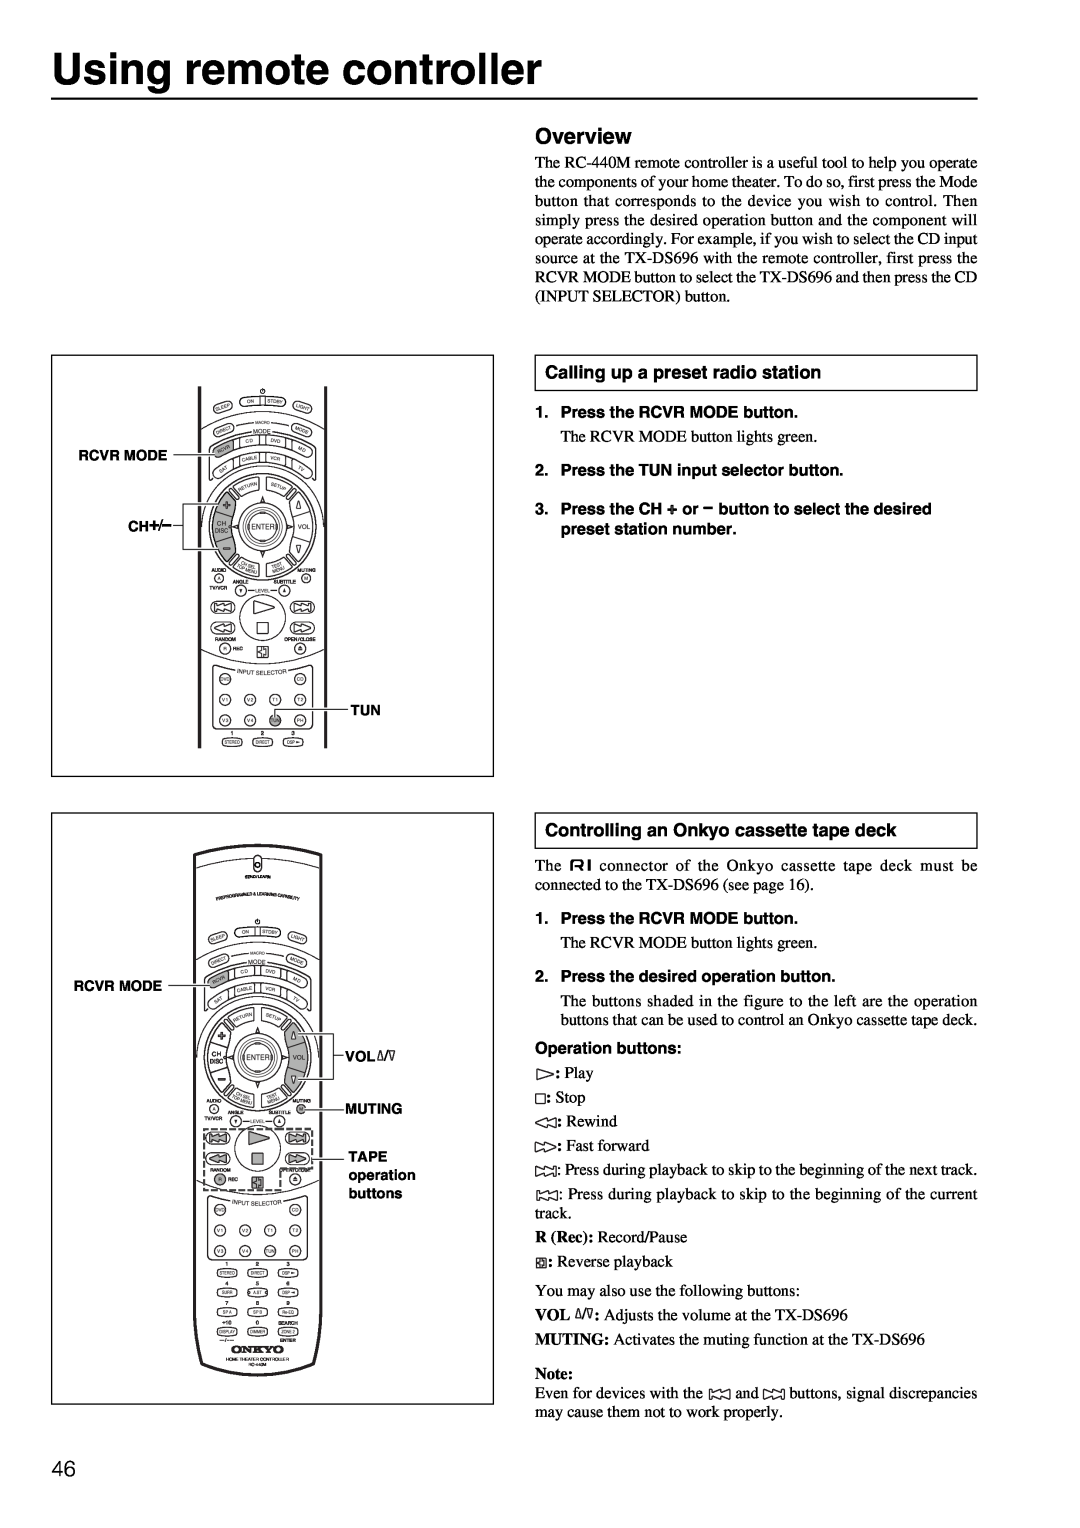 Onkyo TX-DS696 appendix Using remote controller, Overview, Calling up a preset radio station 